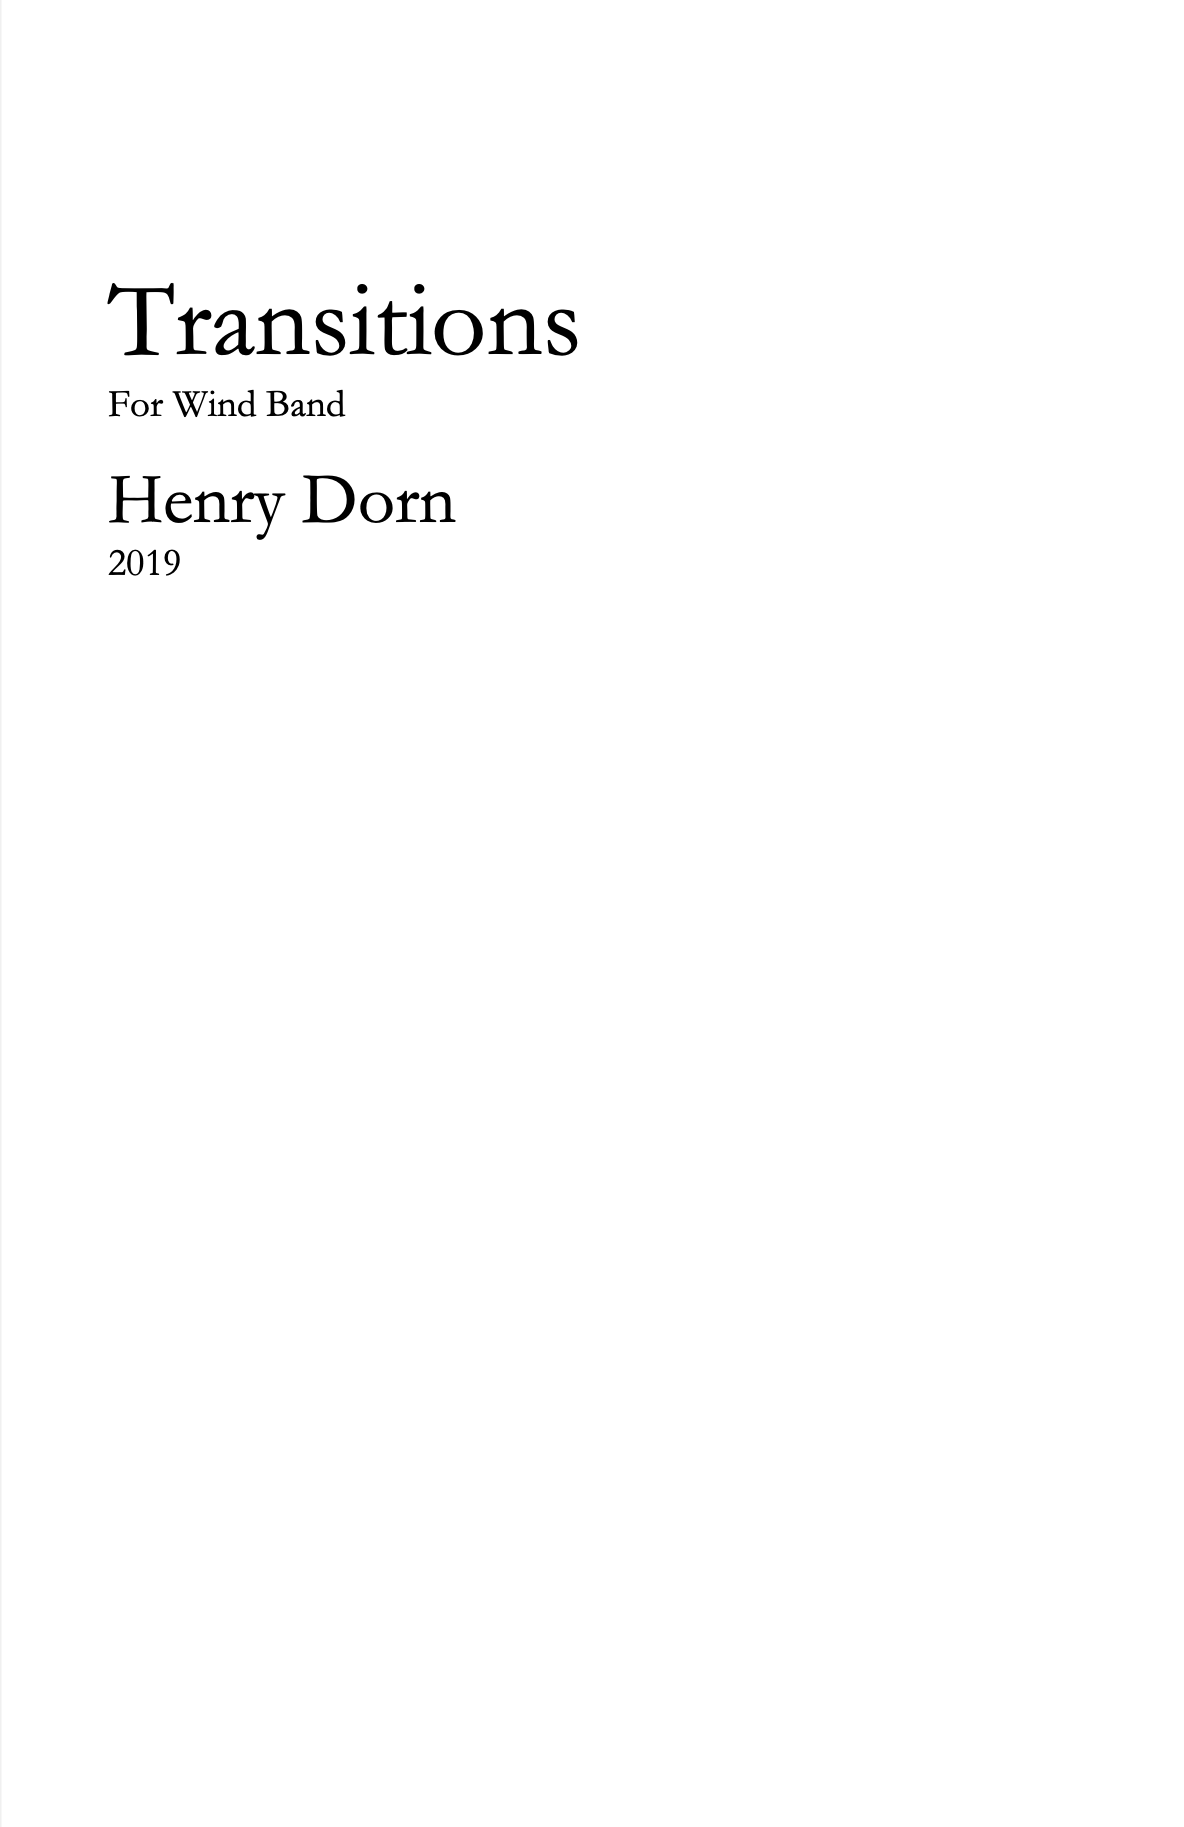 Transitions For Wind Ensemble  by Henry Dorn